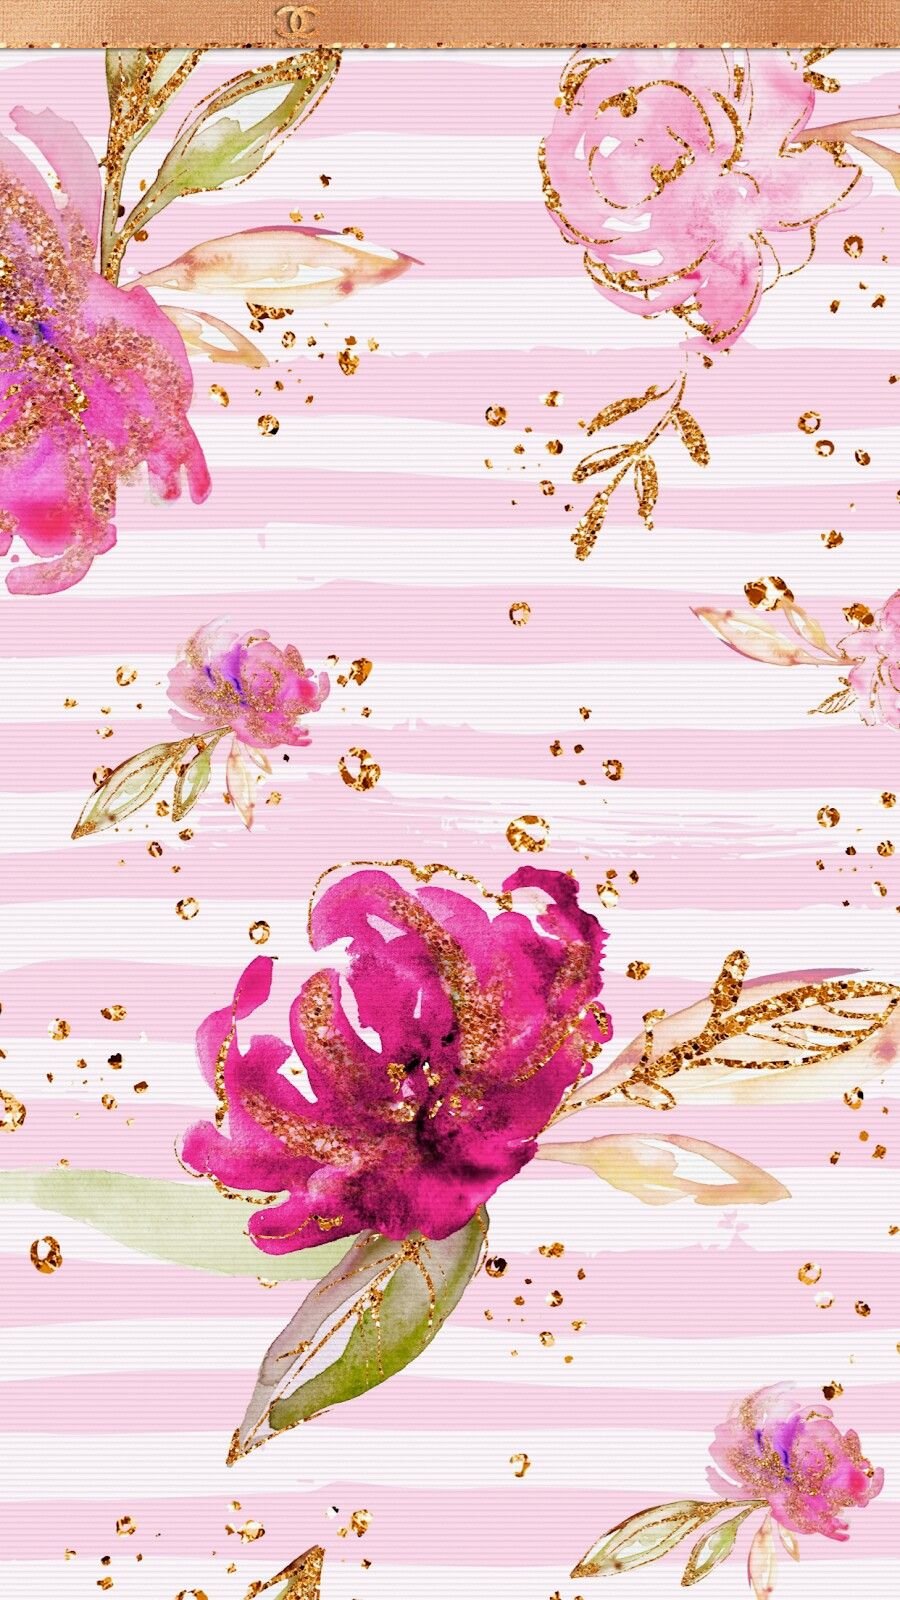 Tee's Iscreen Creations Flowery Wallpaper, Kawaii Wallpaper, - Taylor Swift Lockscreen , HD Wallpaper & Backgrounds